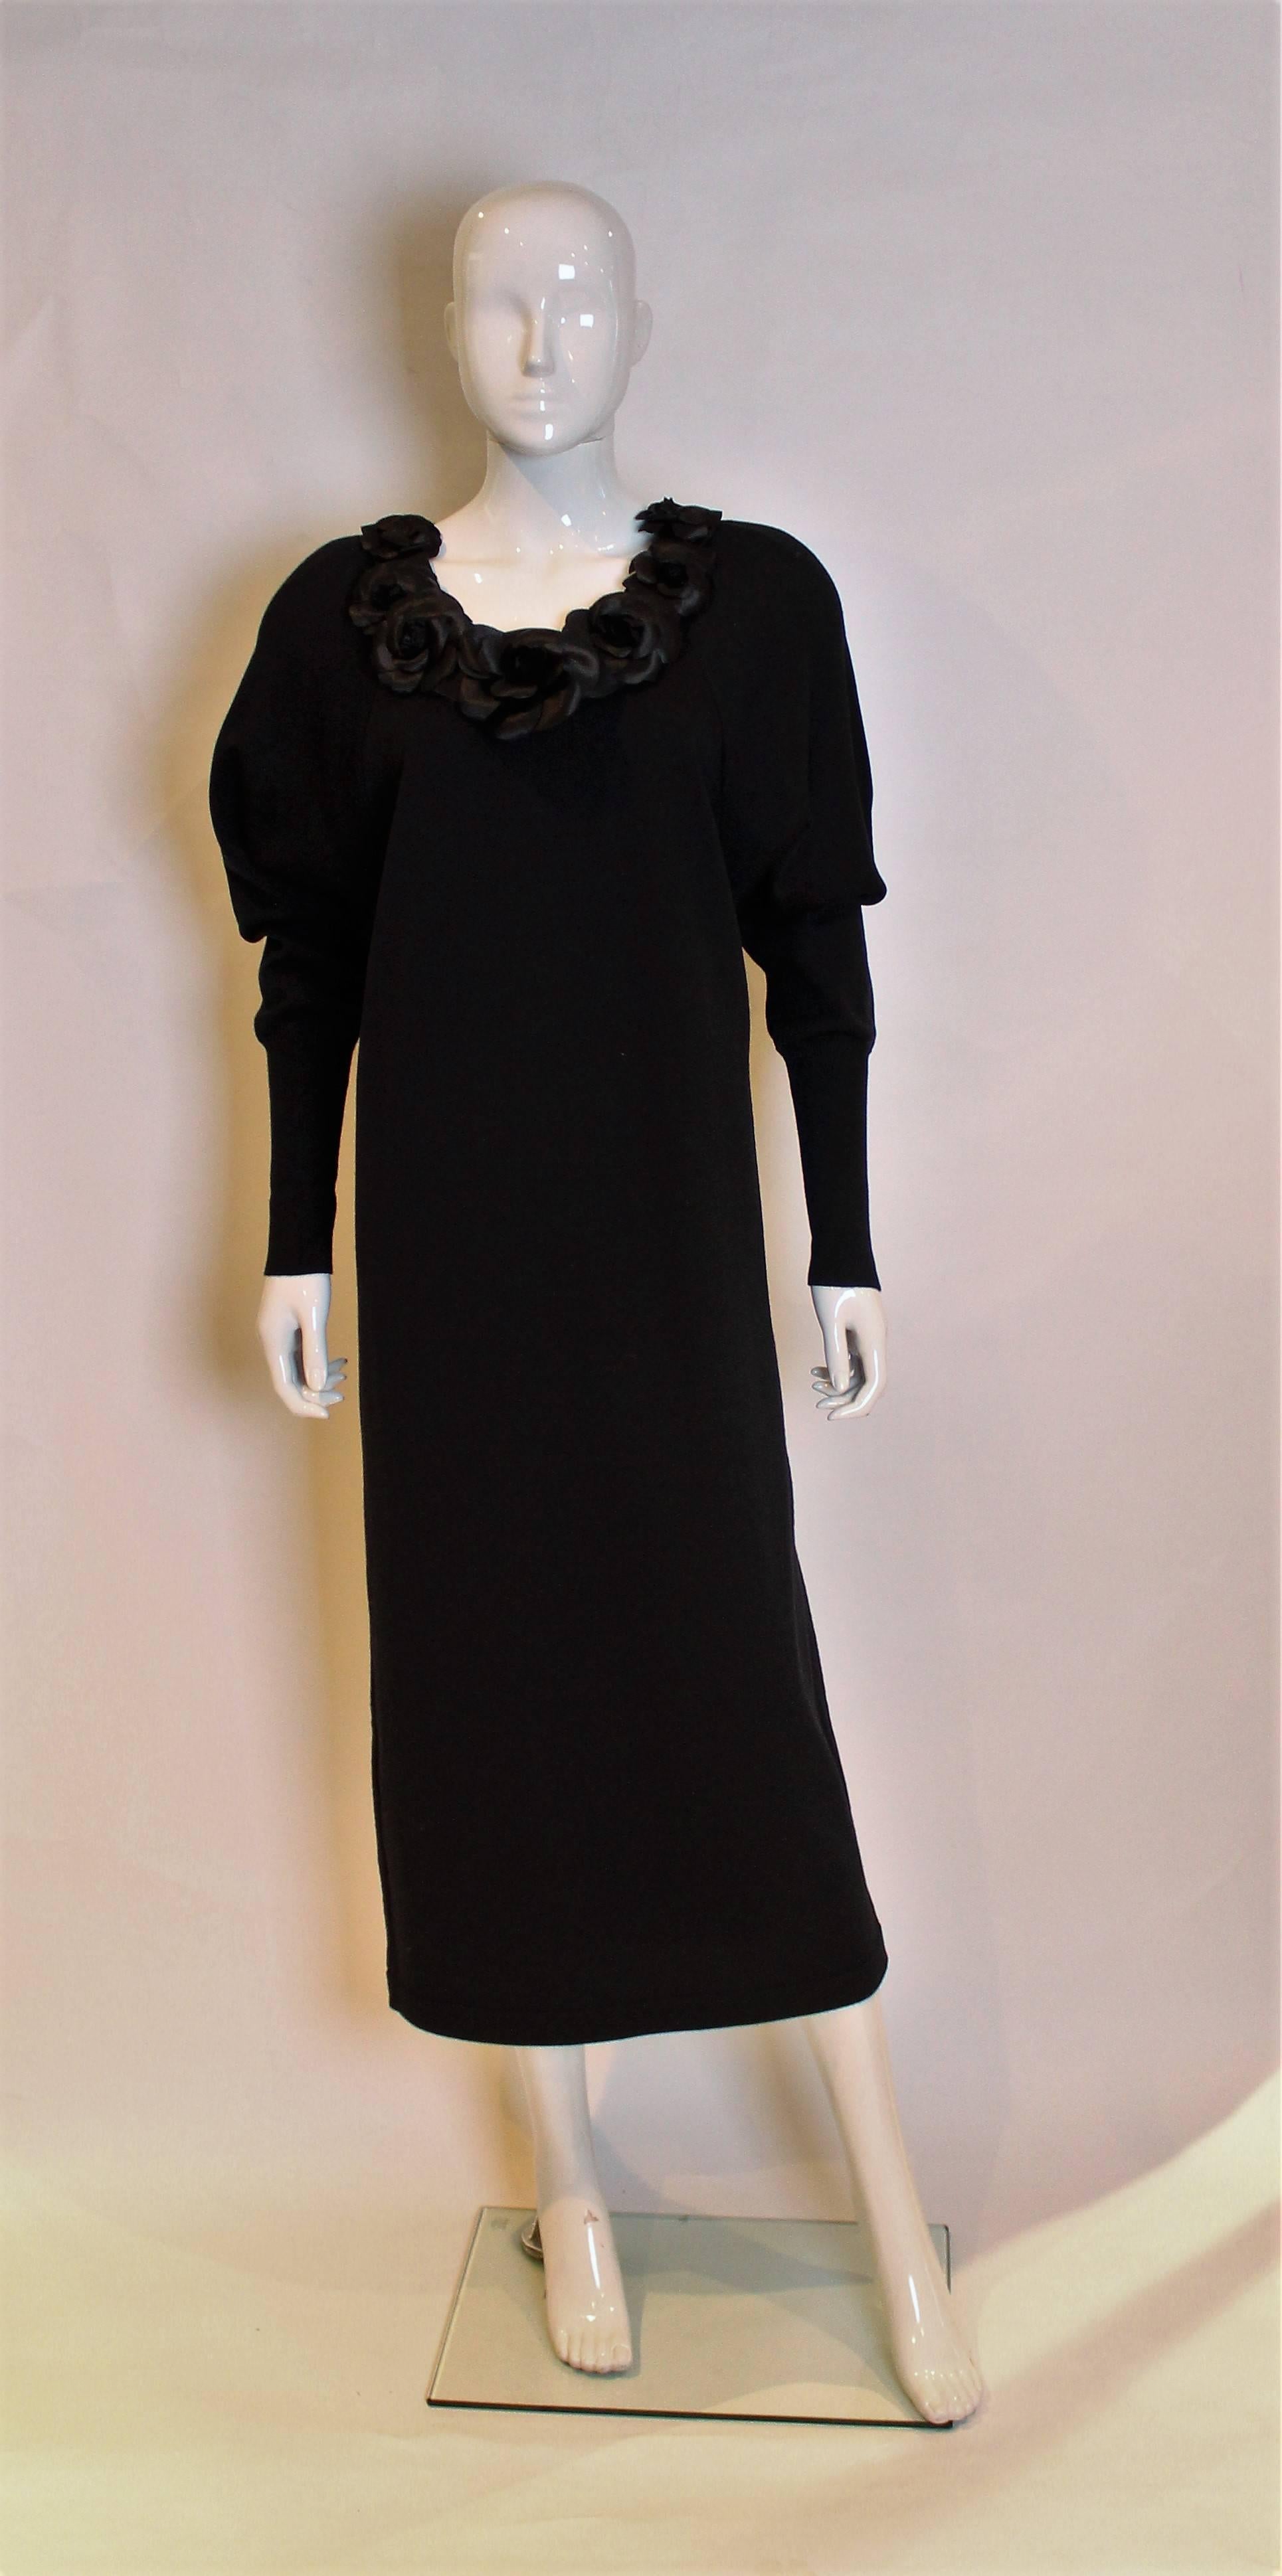 Chic and easy to wear dress from Chanel.
This sweater dress has a scoop neck,long sleeves with elegant 8'' long cuffs, and silk camelias  along the neckline.